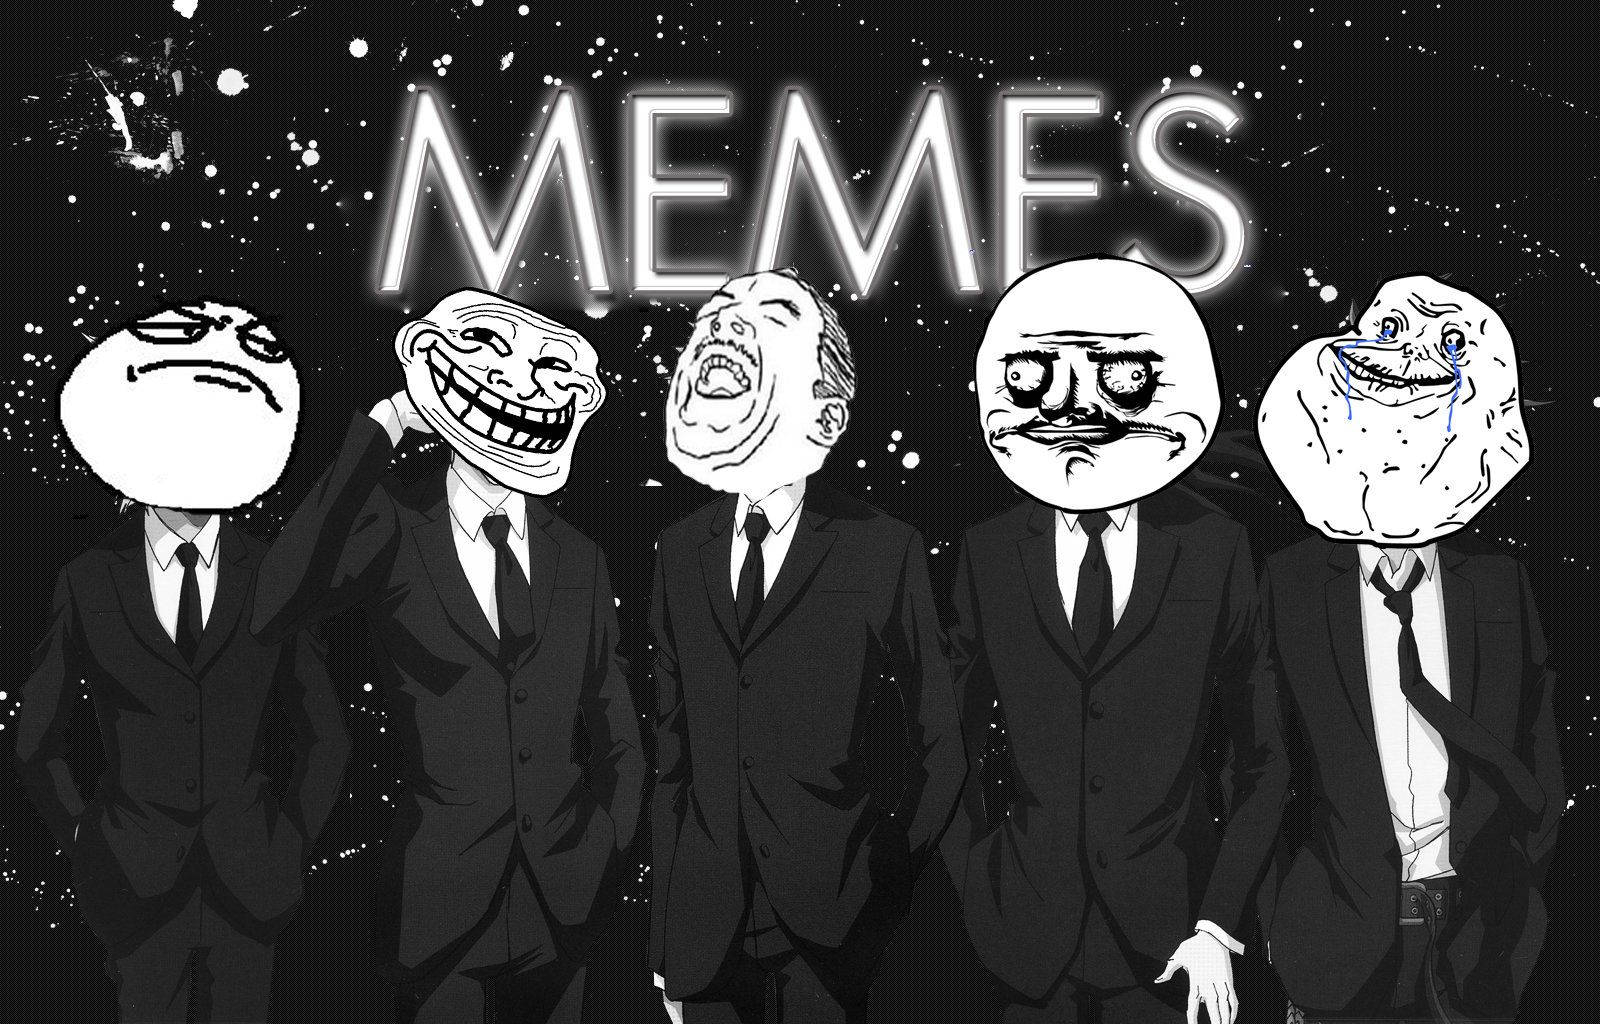 Funny rage faces meme that show different expressions, sad, crying, happy and creepy.